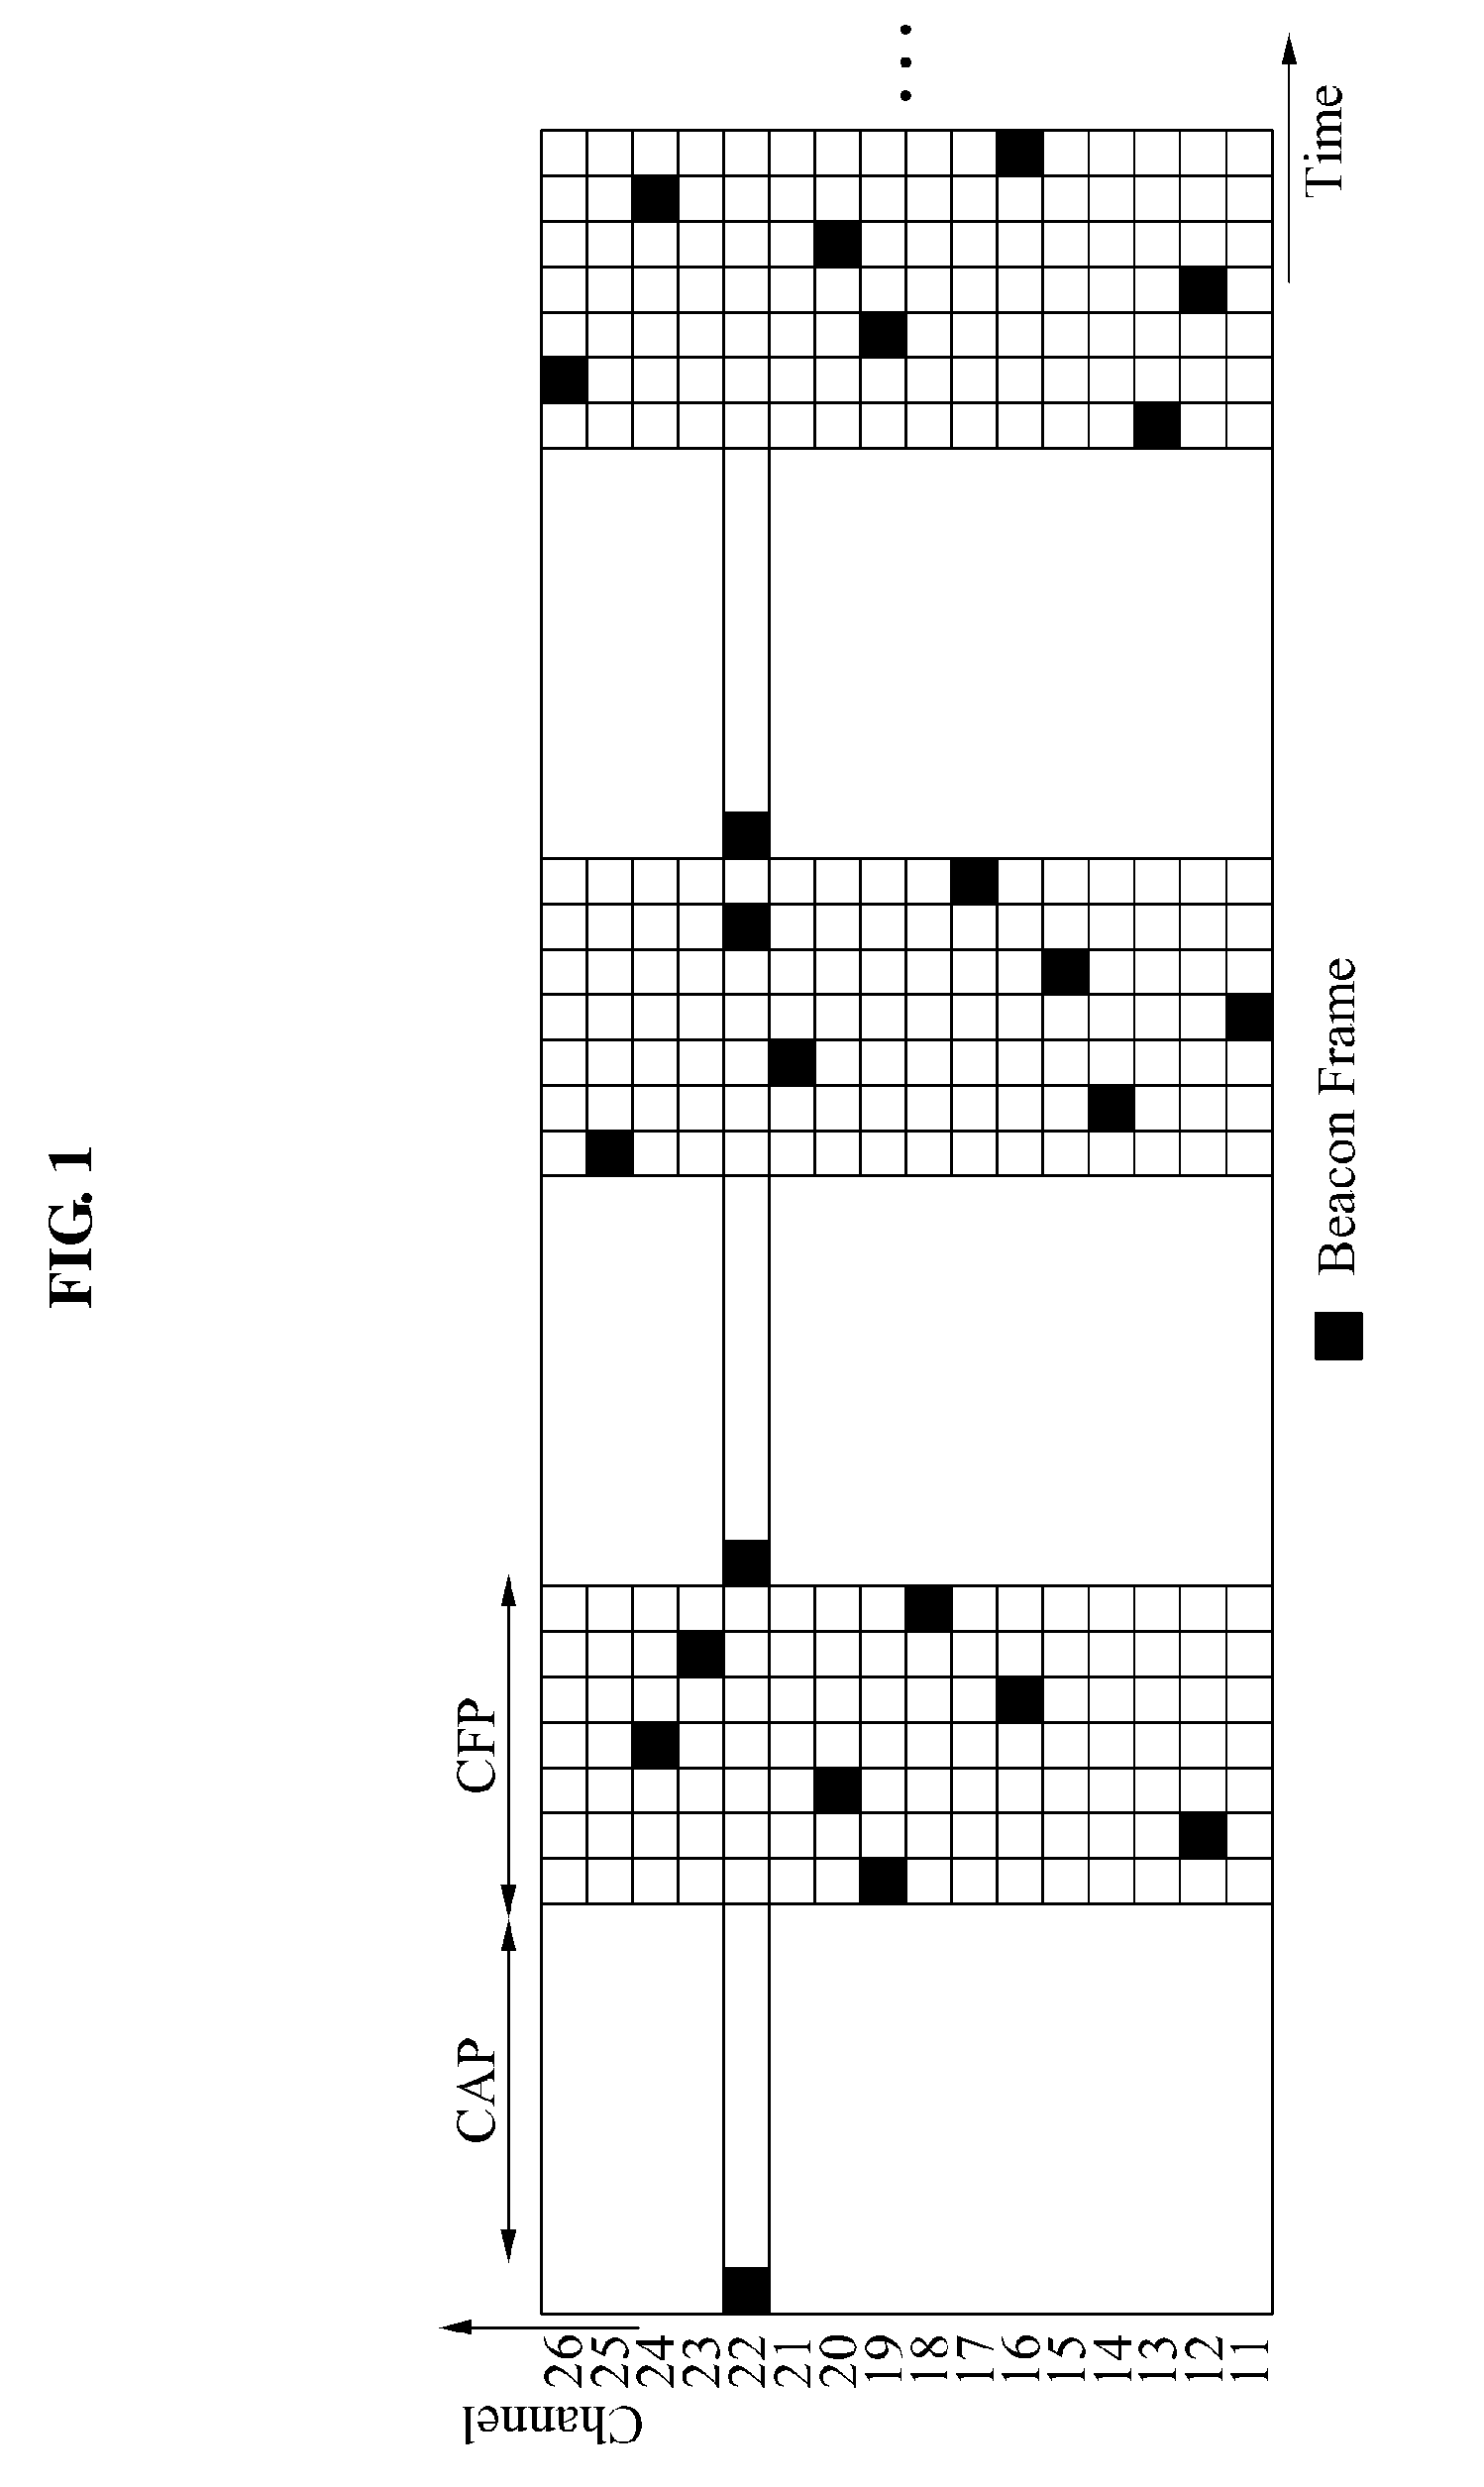 Apparatus and method for managing channel resource in beacon-enabled wireless personal area network (WPAN)